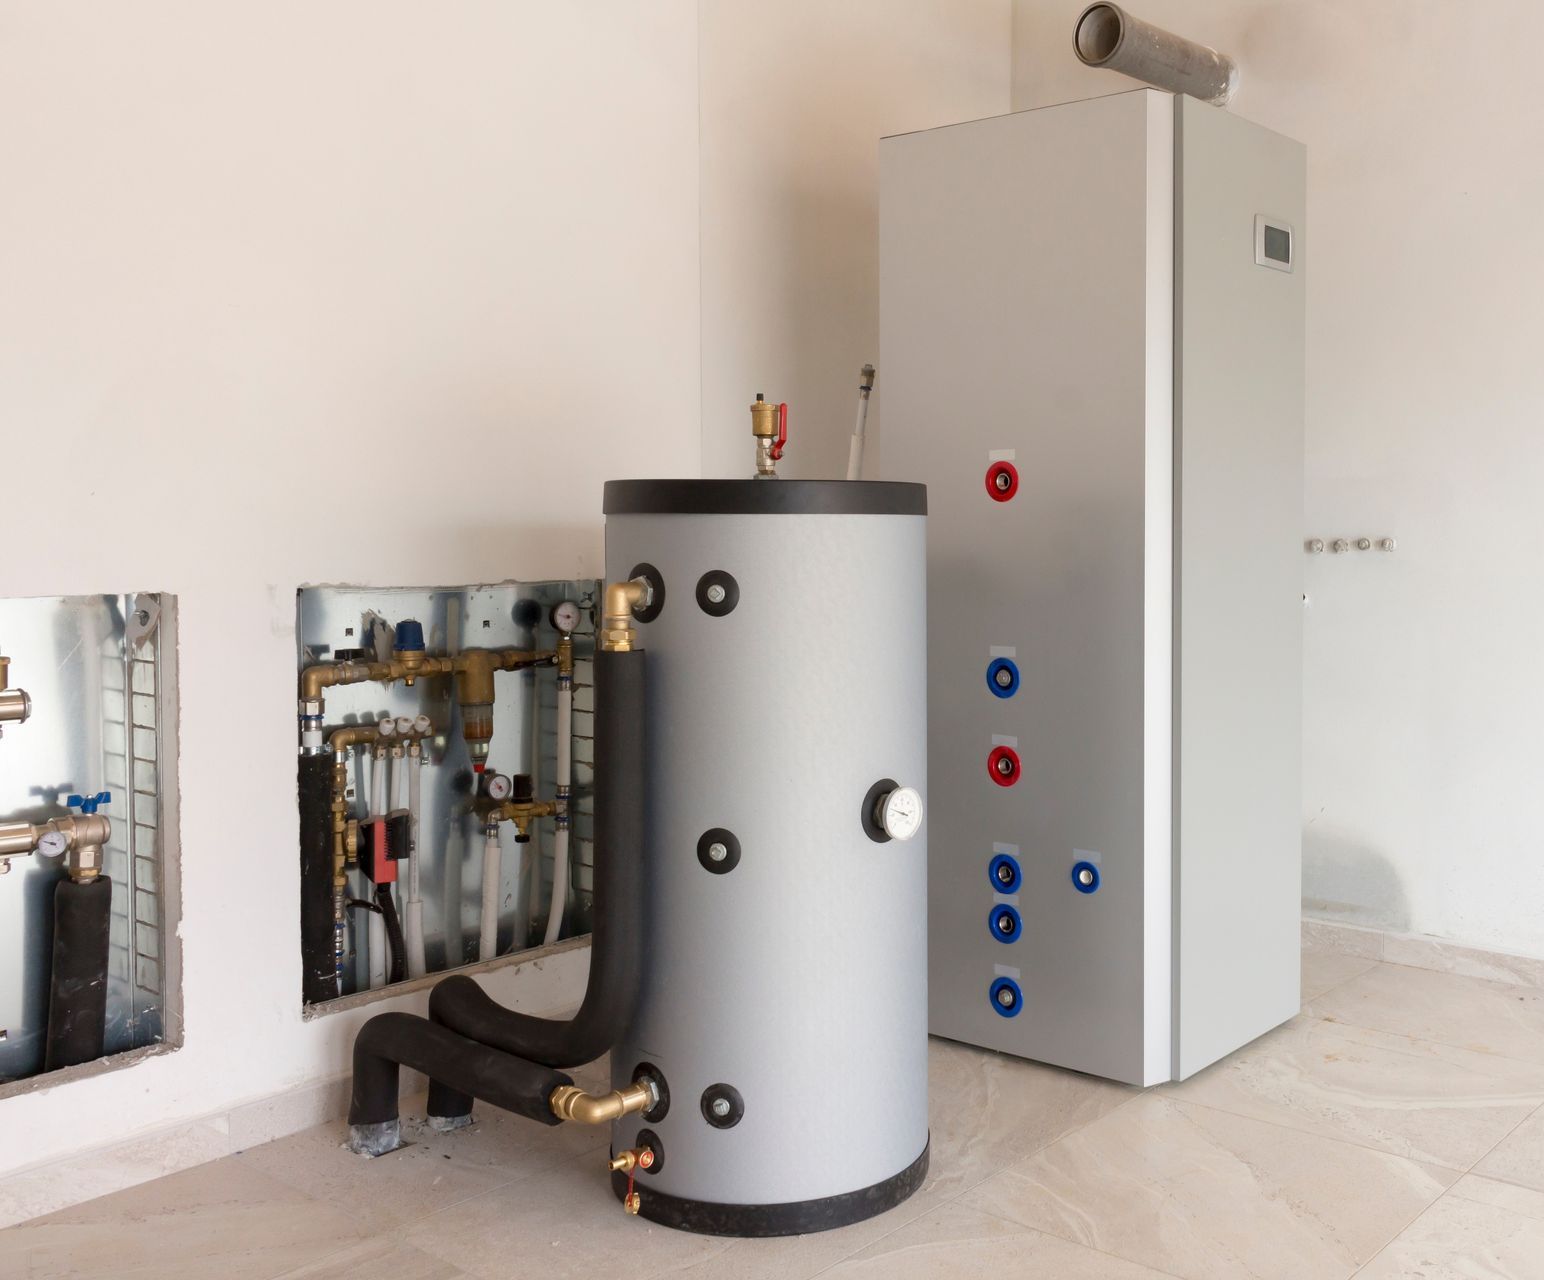 An air-to-water heat pump system installed in a boiler room.